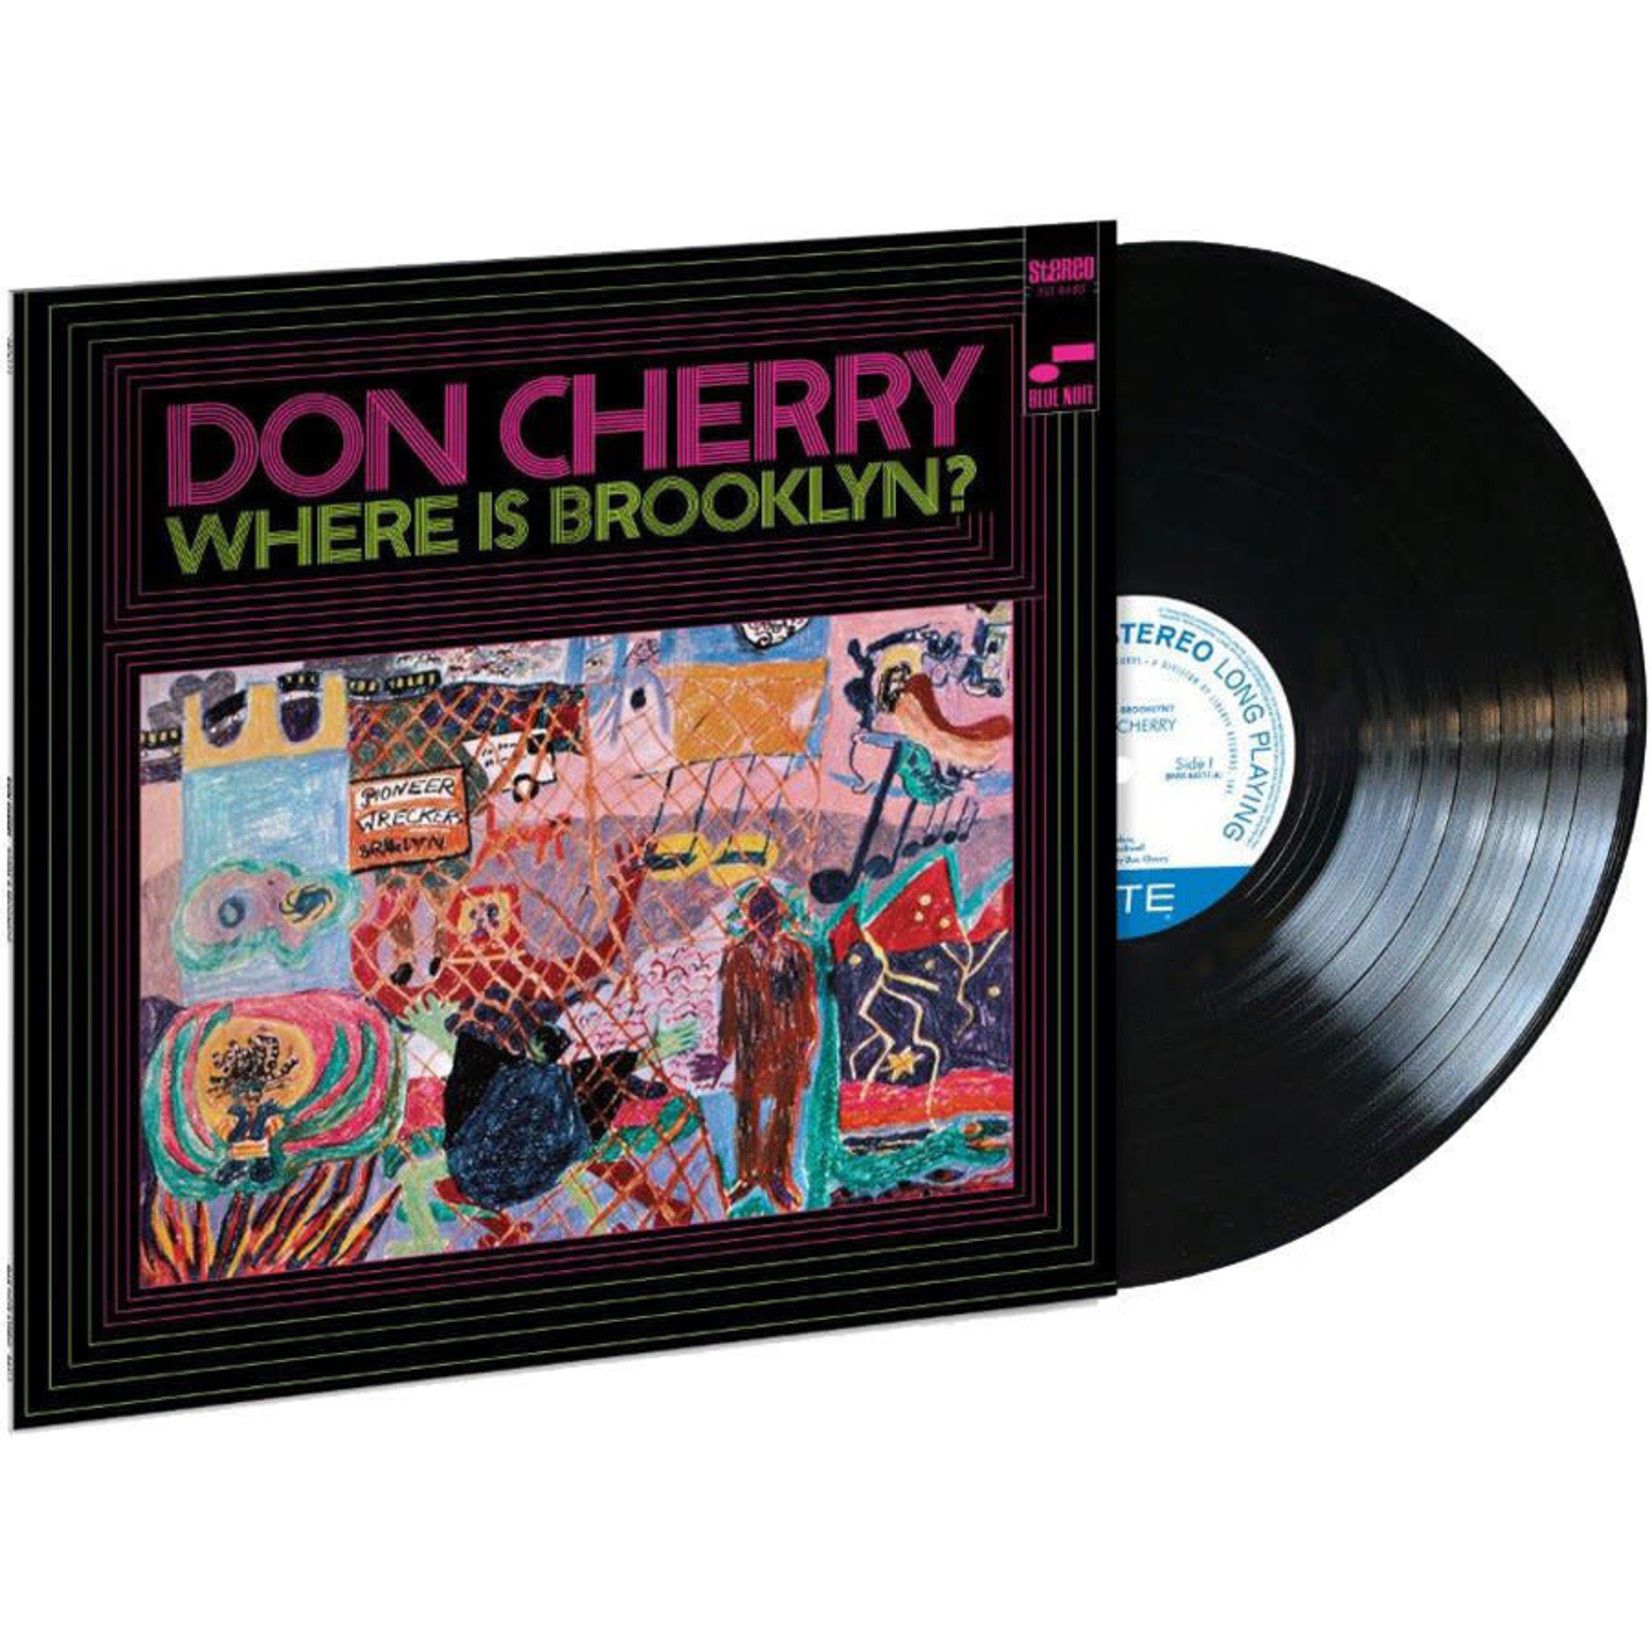 Don Cherry - Where Is Brooklyn? (Blue Note Classic Vinyl Series) [LP]